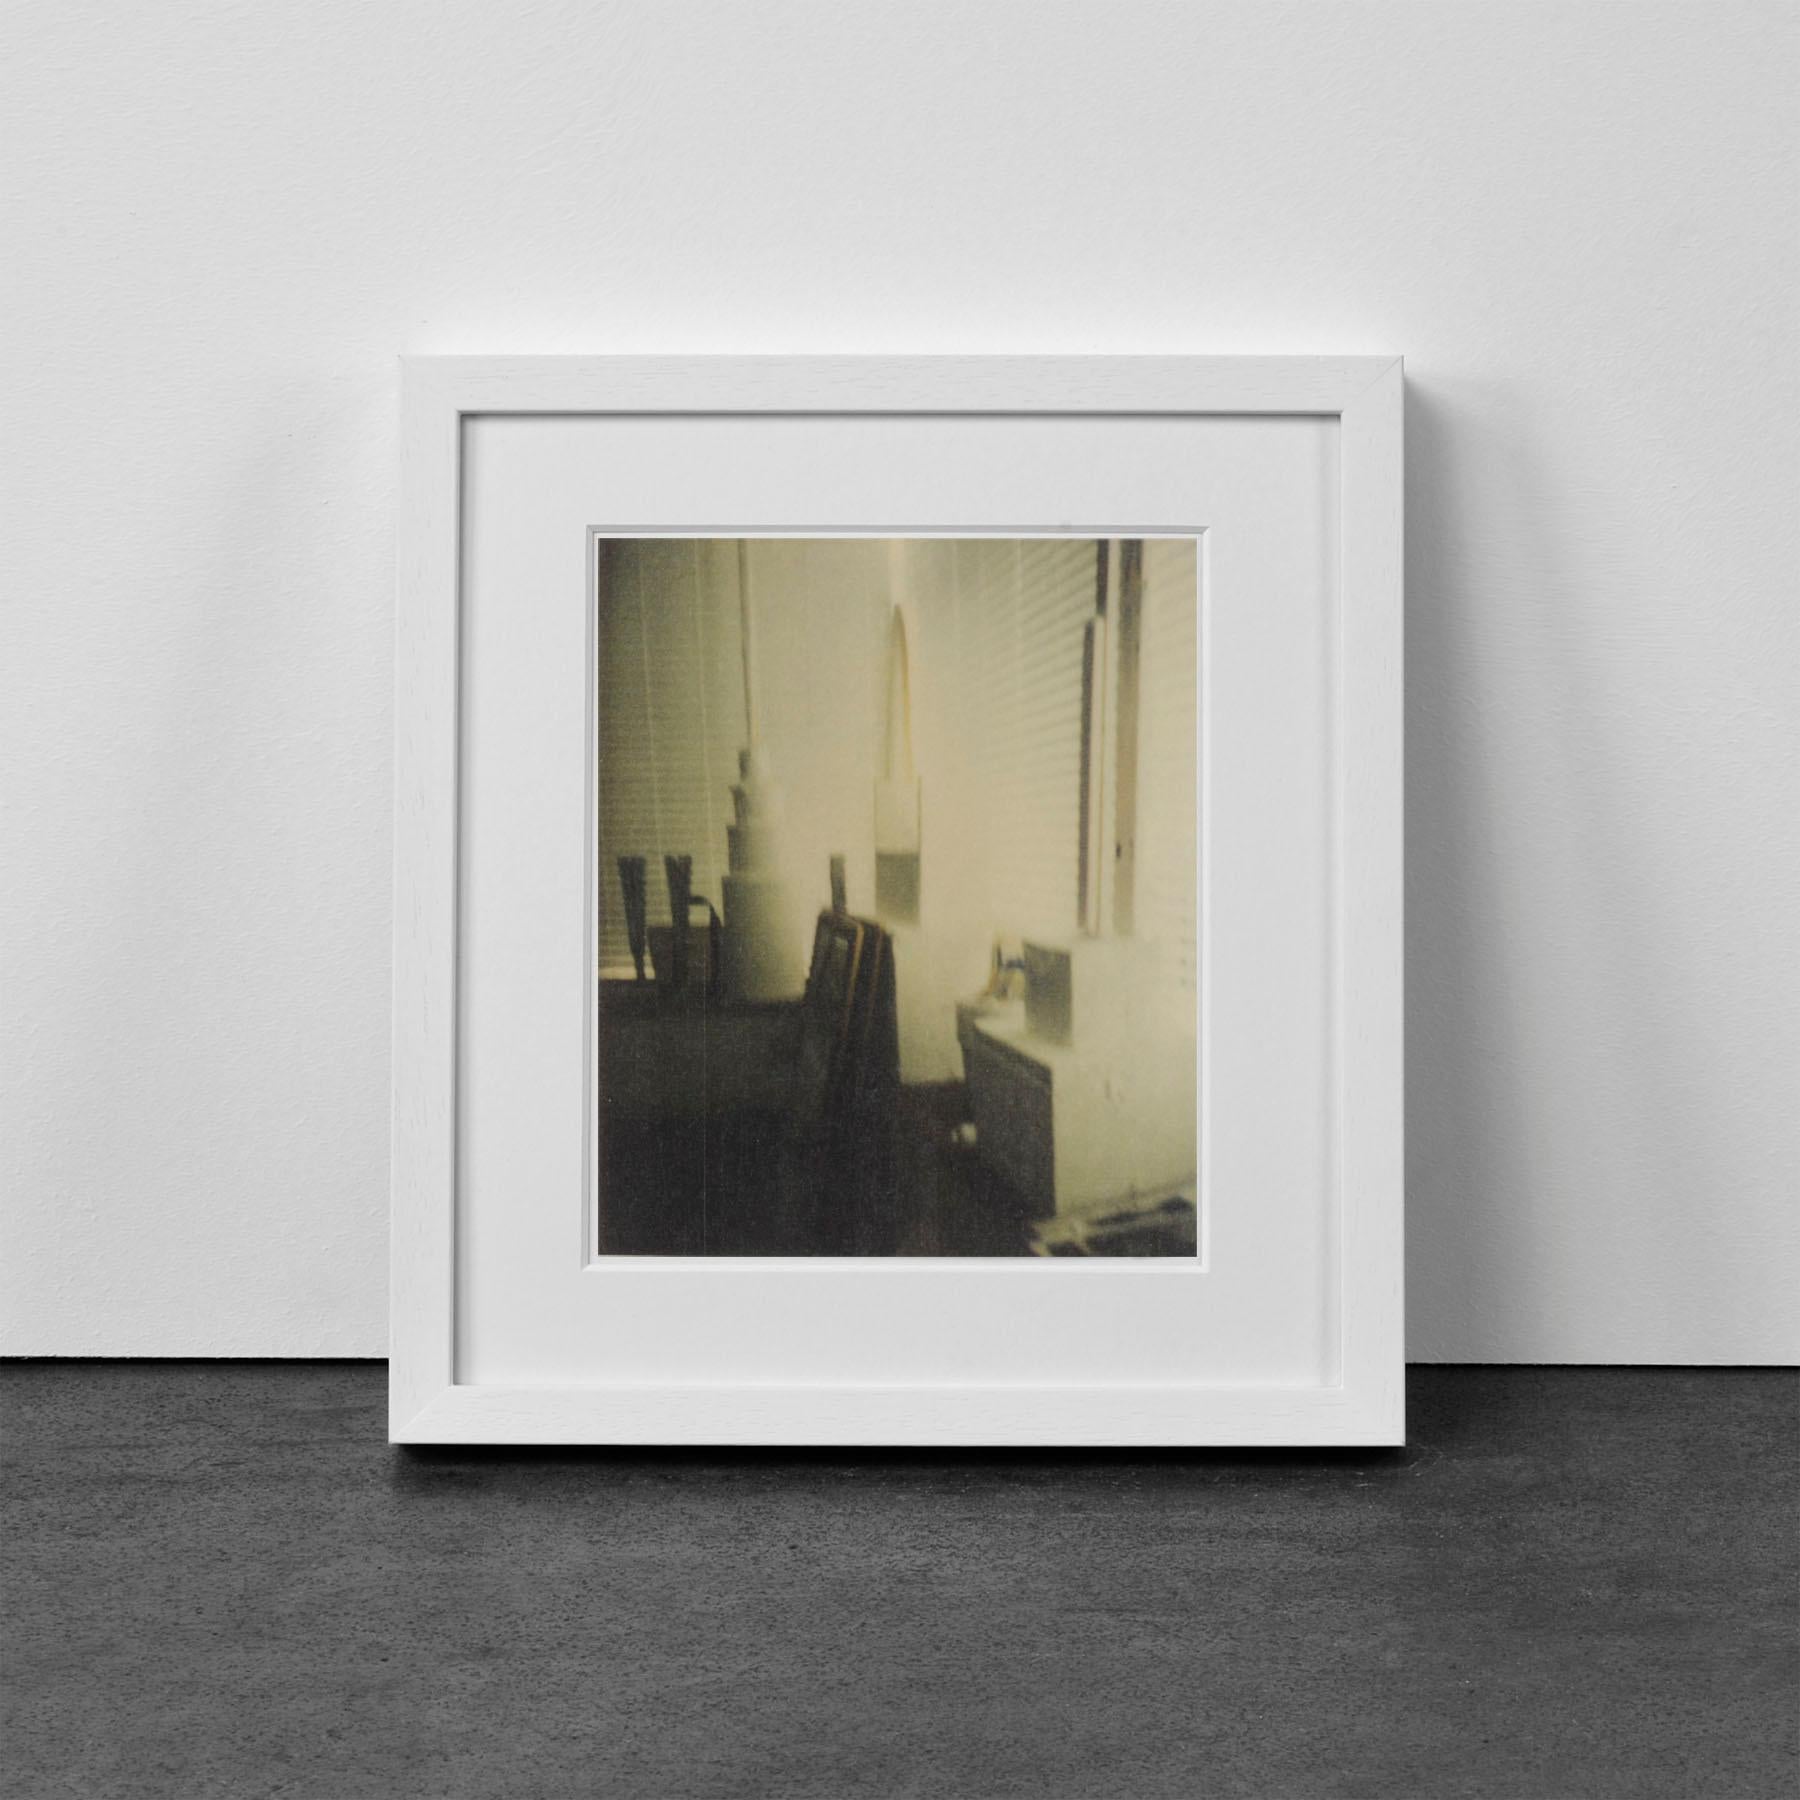 Studio Lexington - Contemporary, 21st Century, Dry-print, Limited Edition - Print by Cy Twombly